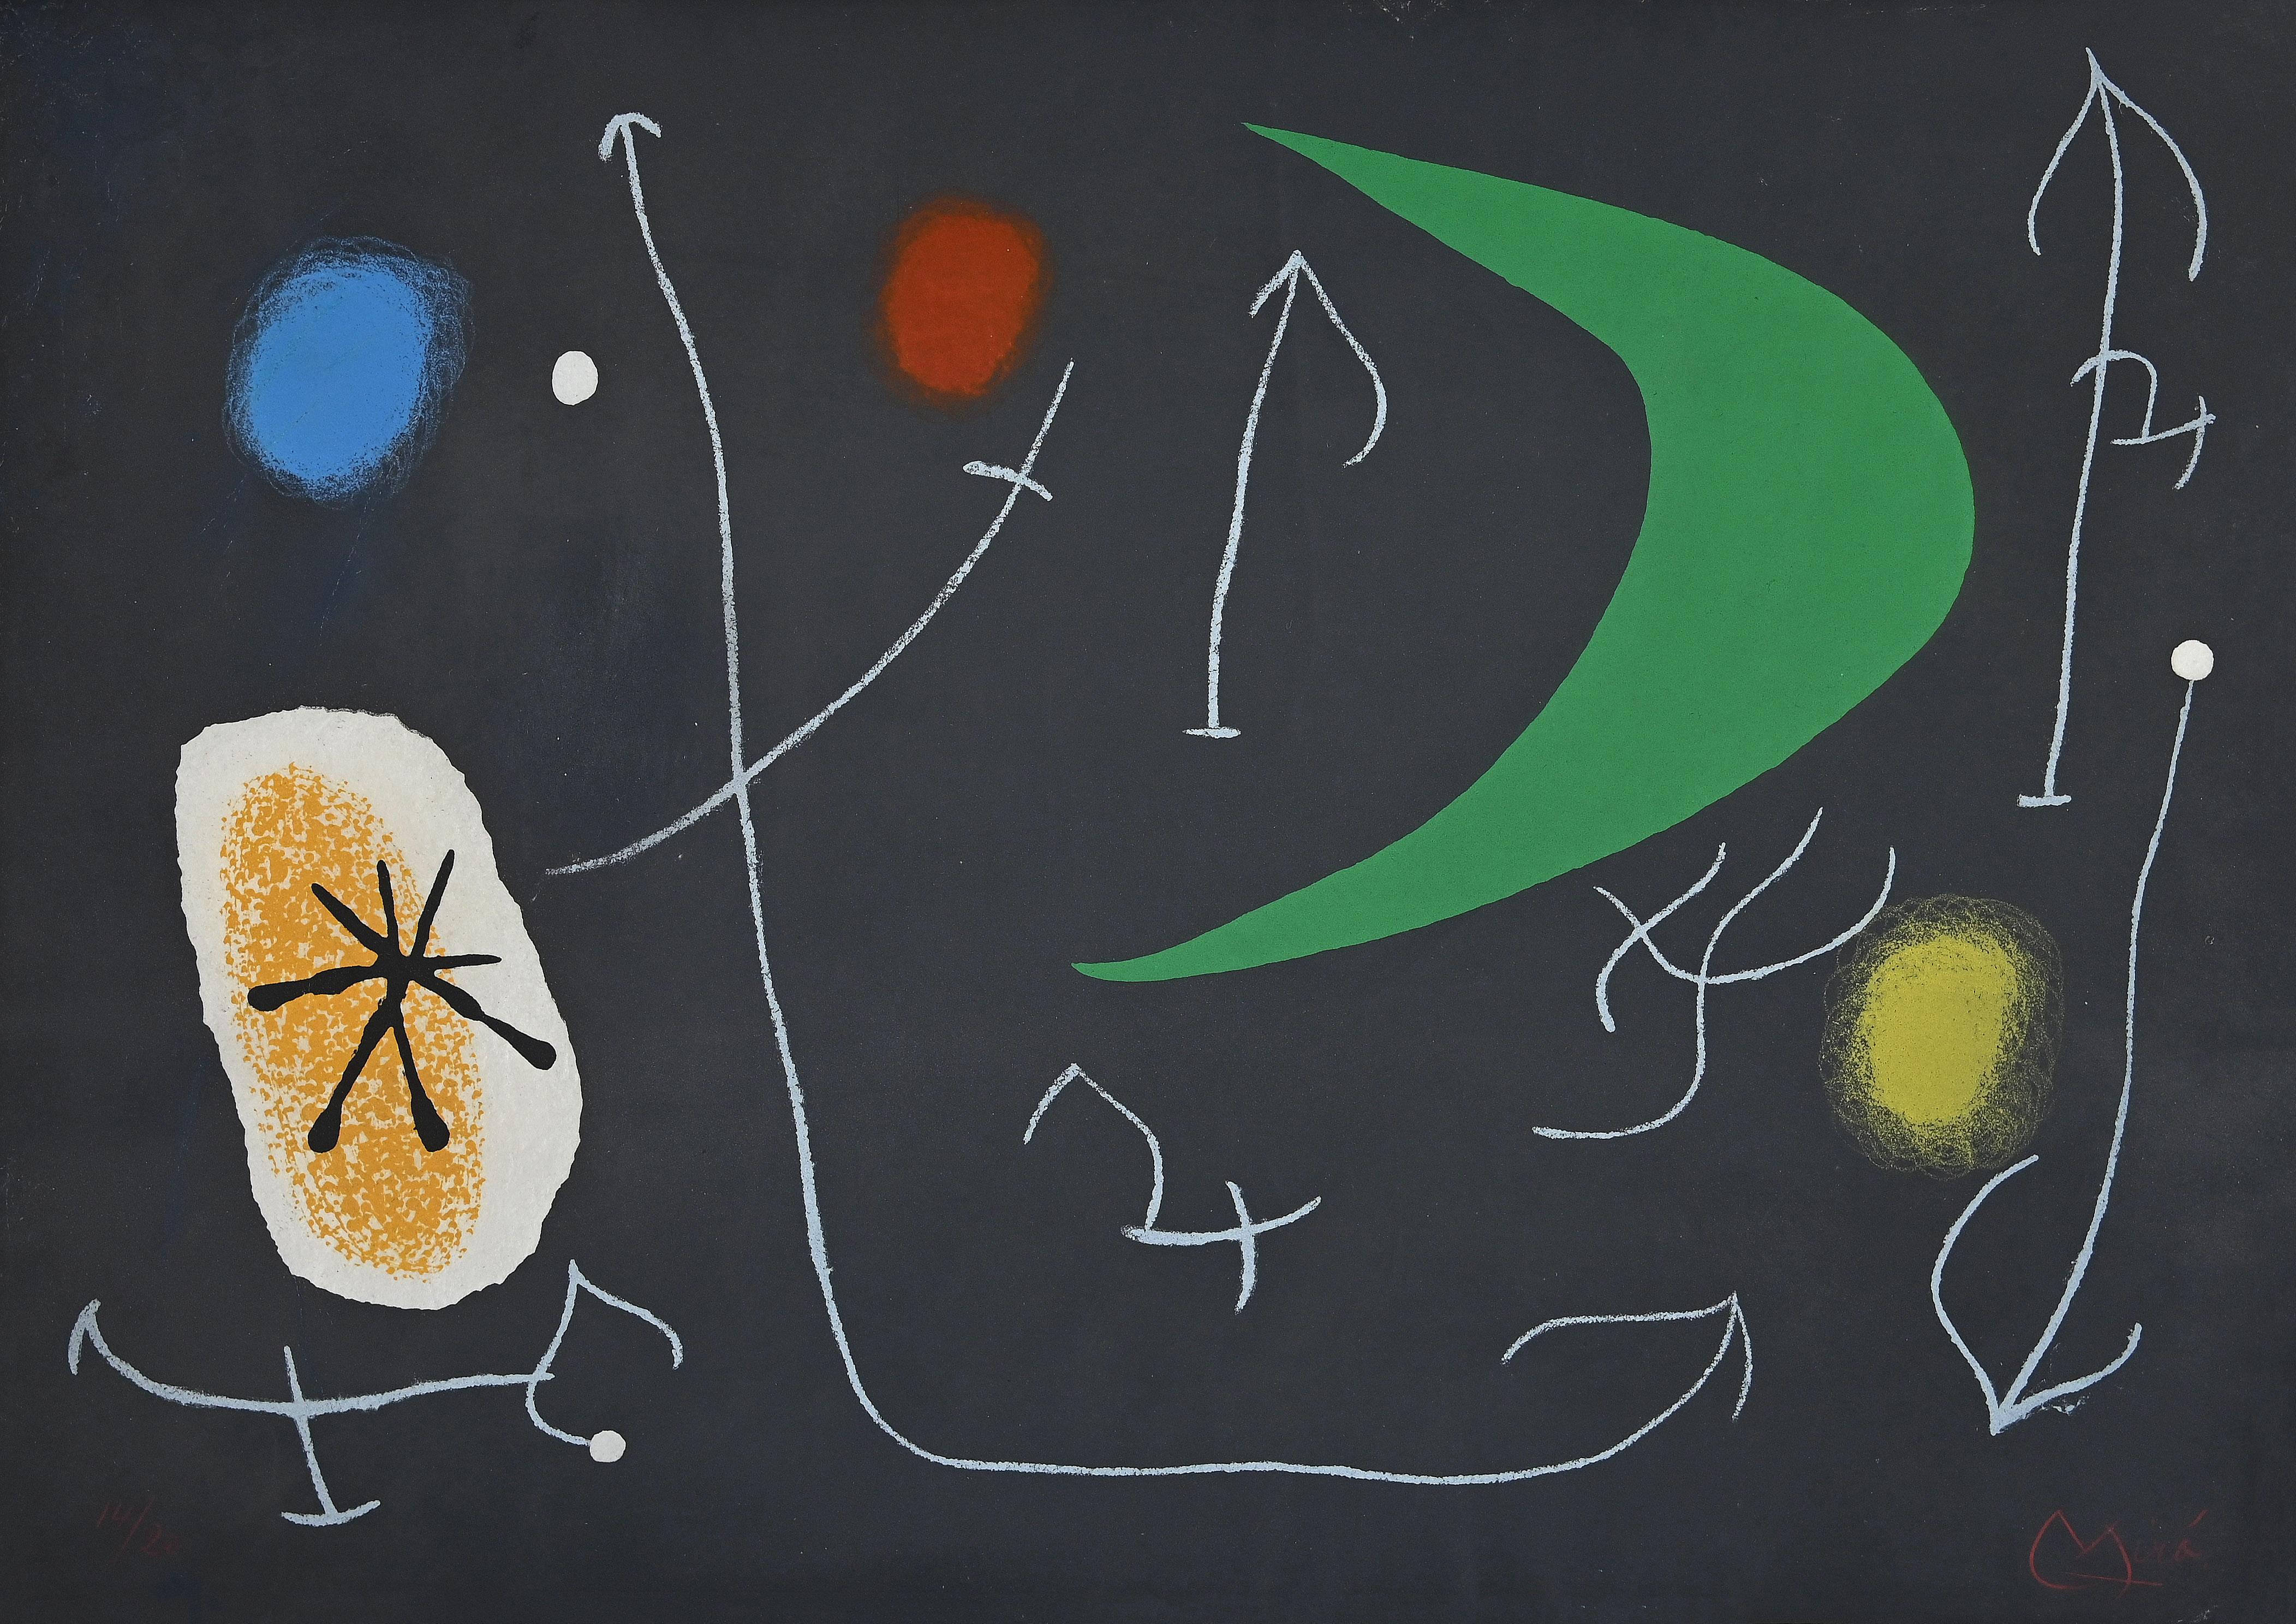 Joan Miró Abstract Print - Le Lèzard aux Plumes d'Or - Lithograph - 1971